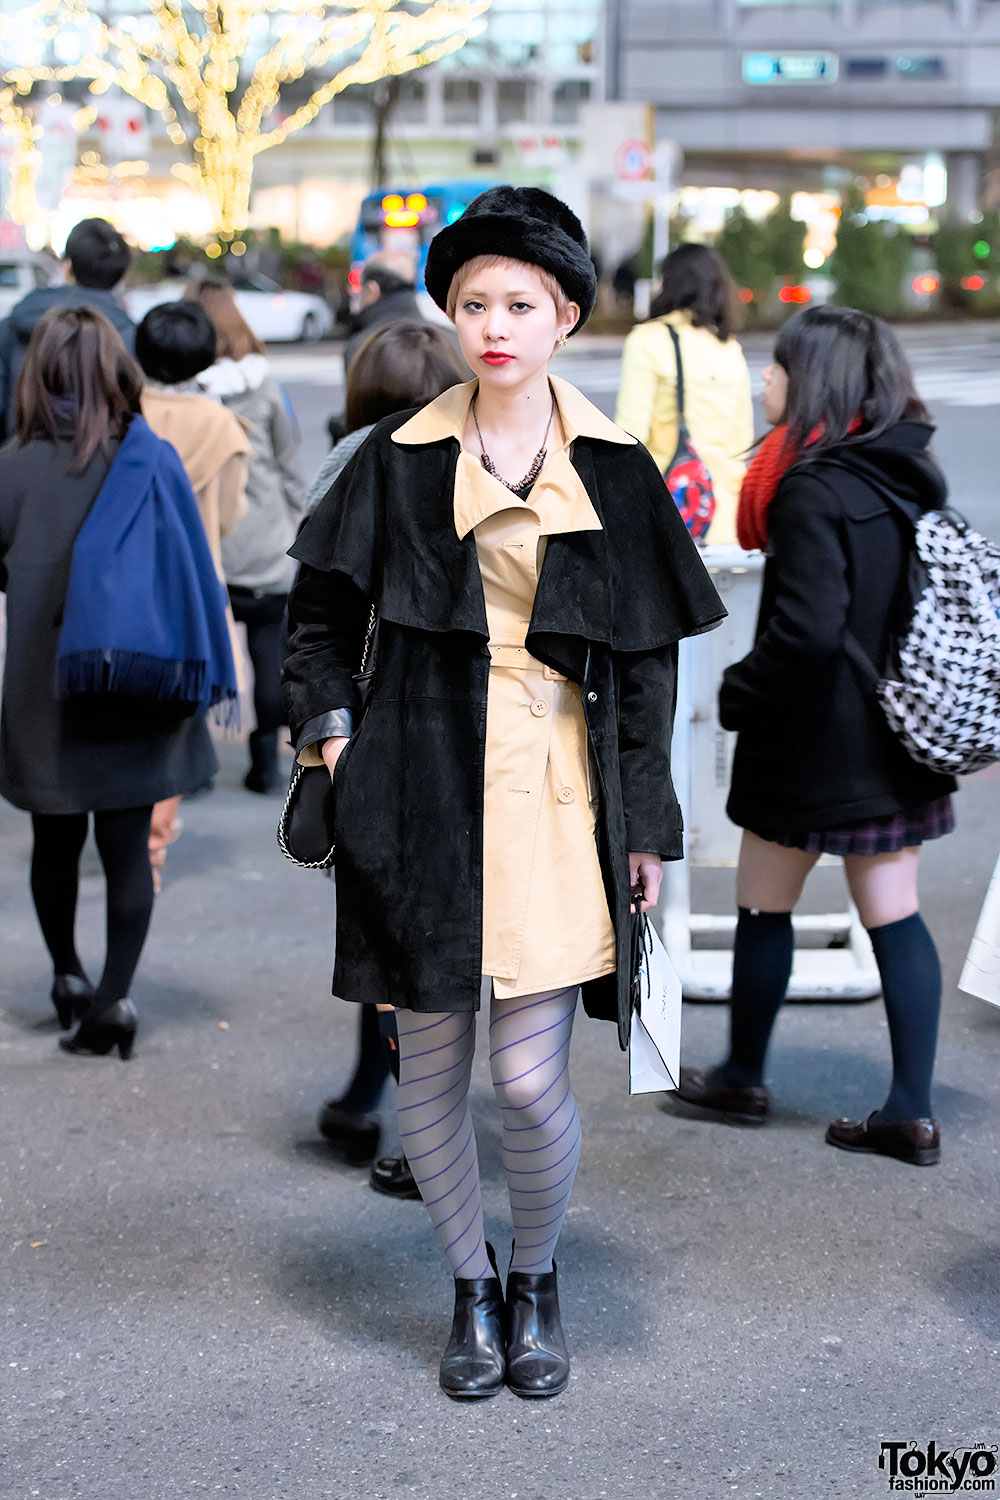 Furry Black Hat, Suede Overcoat & Striped Tights in Shibuya